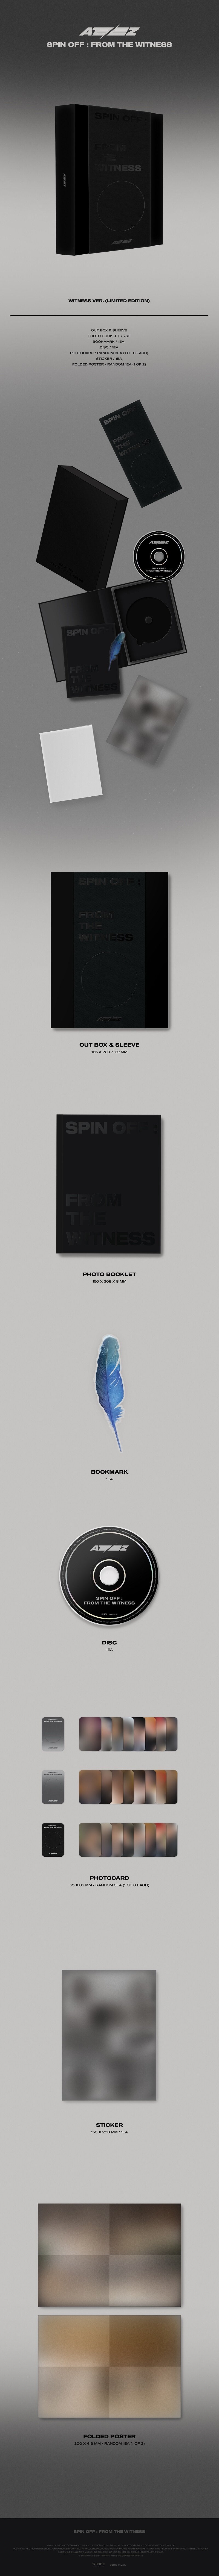 ATEEZ 1ST SINGLE ALBUM 'SPIN OFF : FROM THE WITNESS' (LIMITED) DETAIL